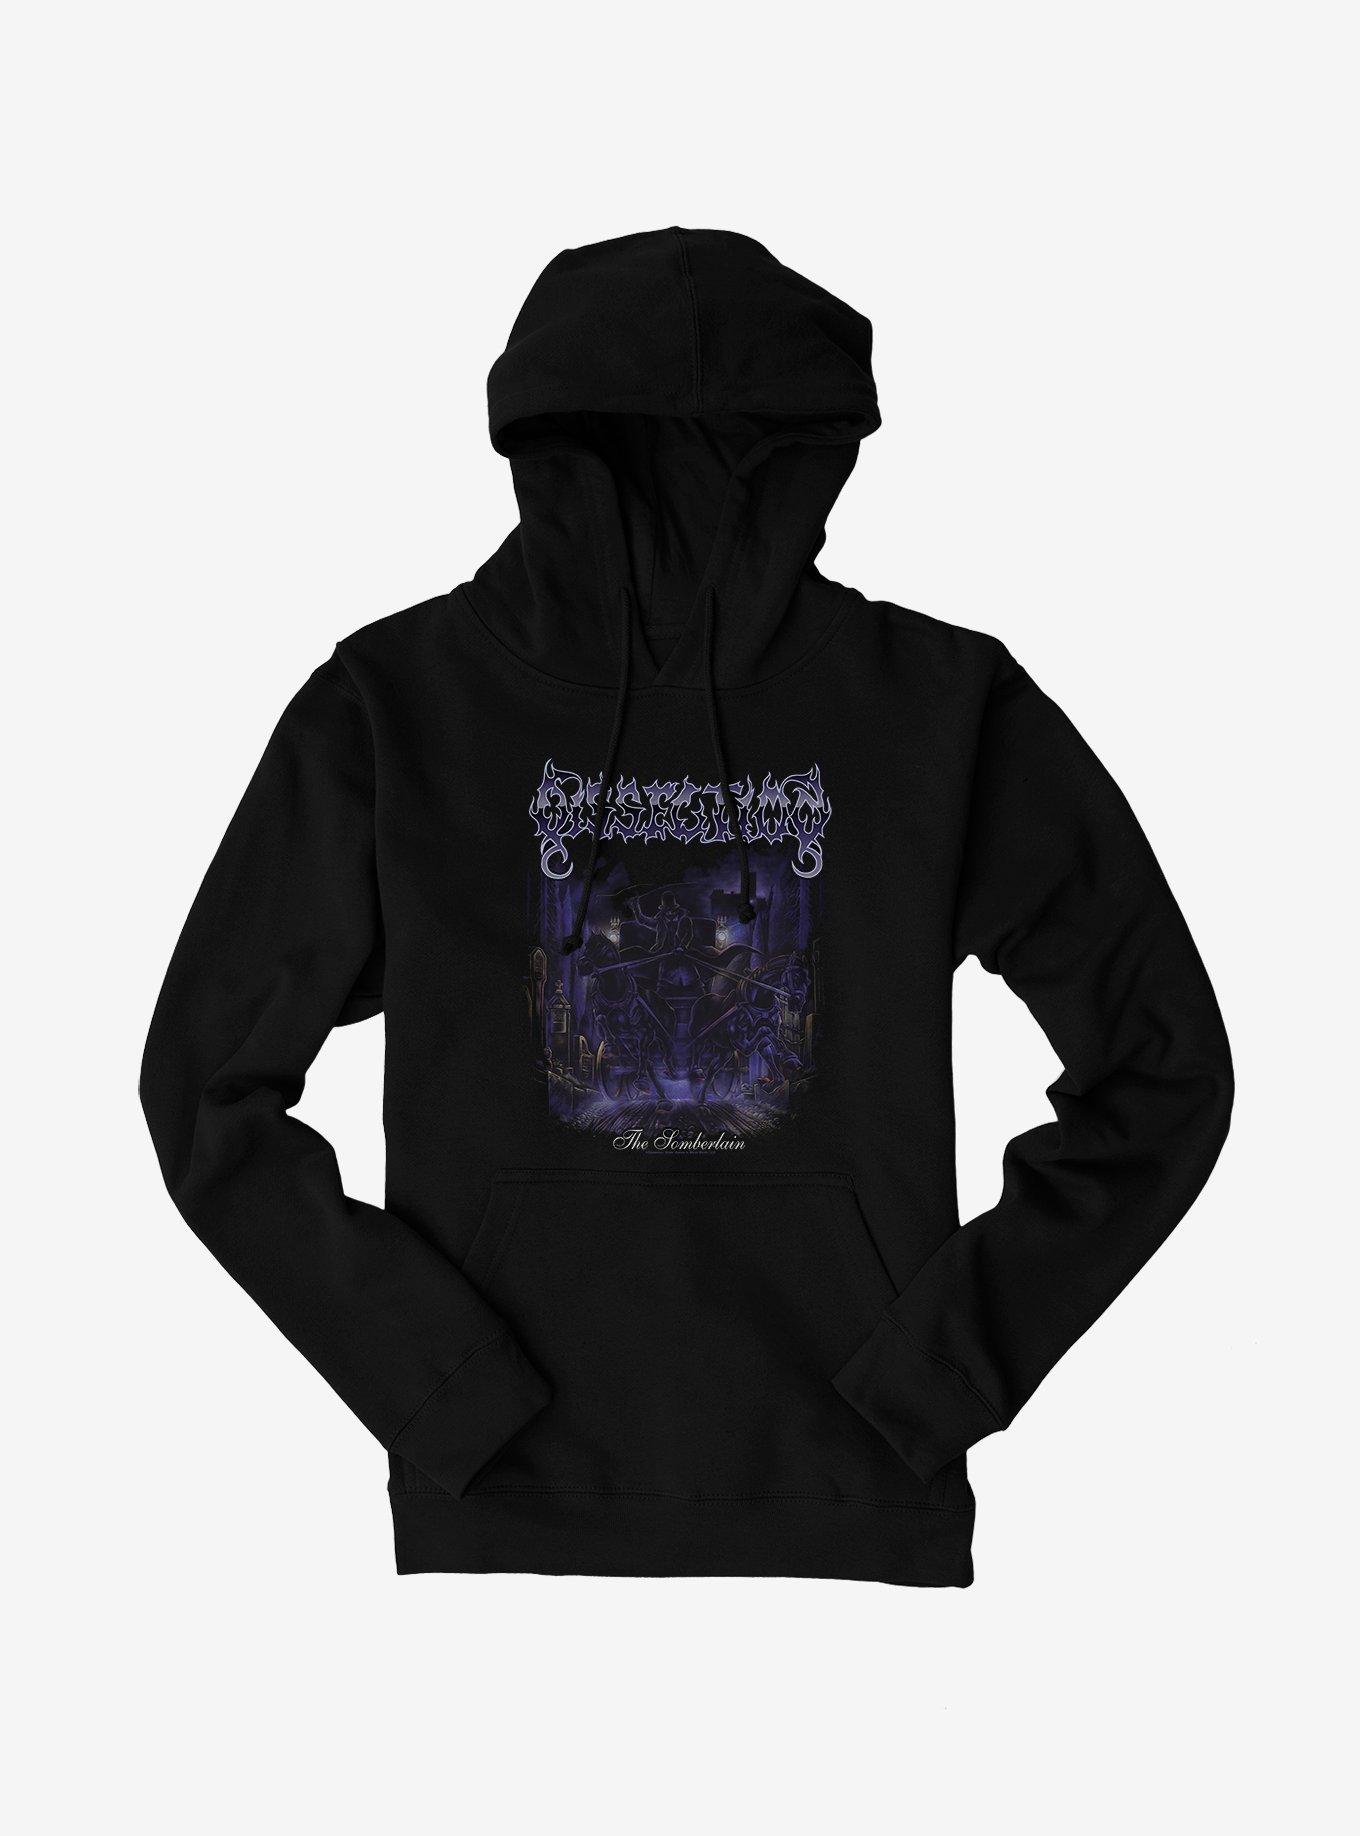 Dissection The Somberlain Hoodie, BLACK, hi-res